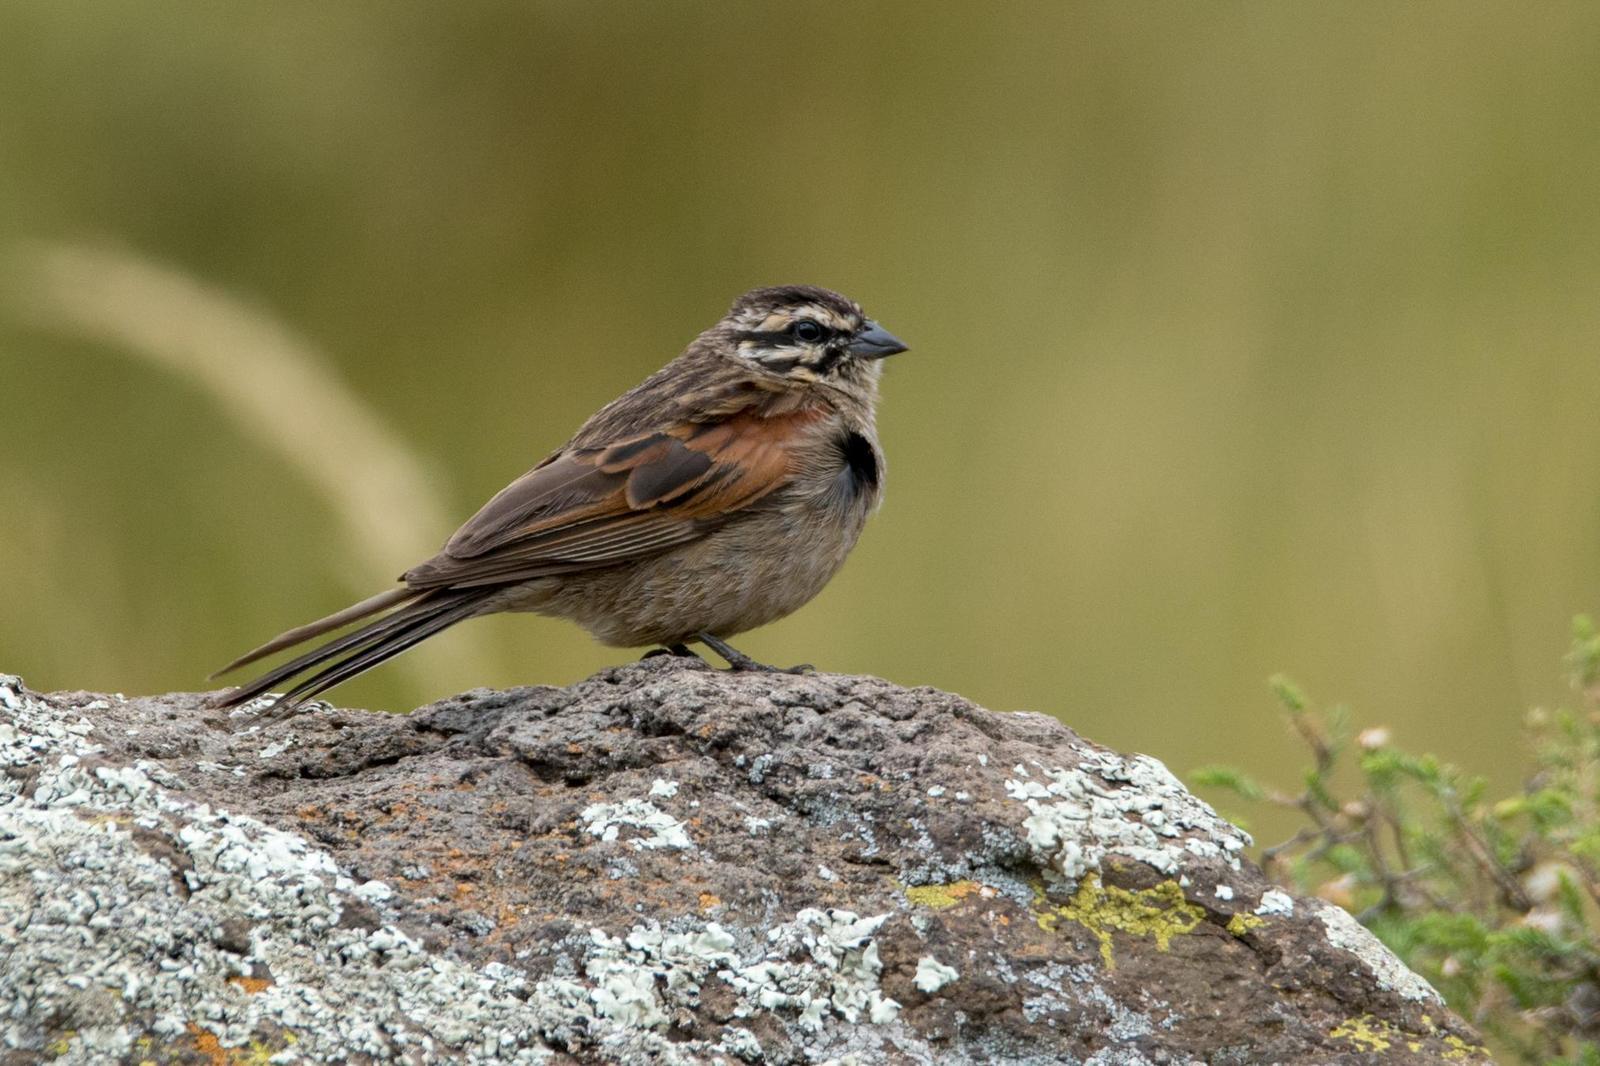 Cape Bunting Photo by Gerald Hoekstra